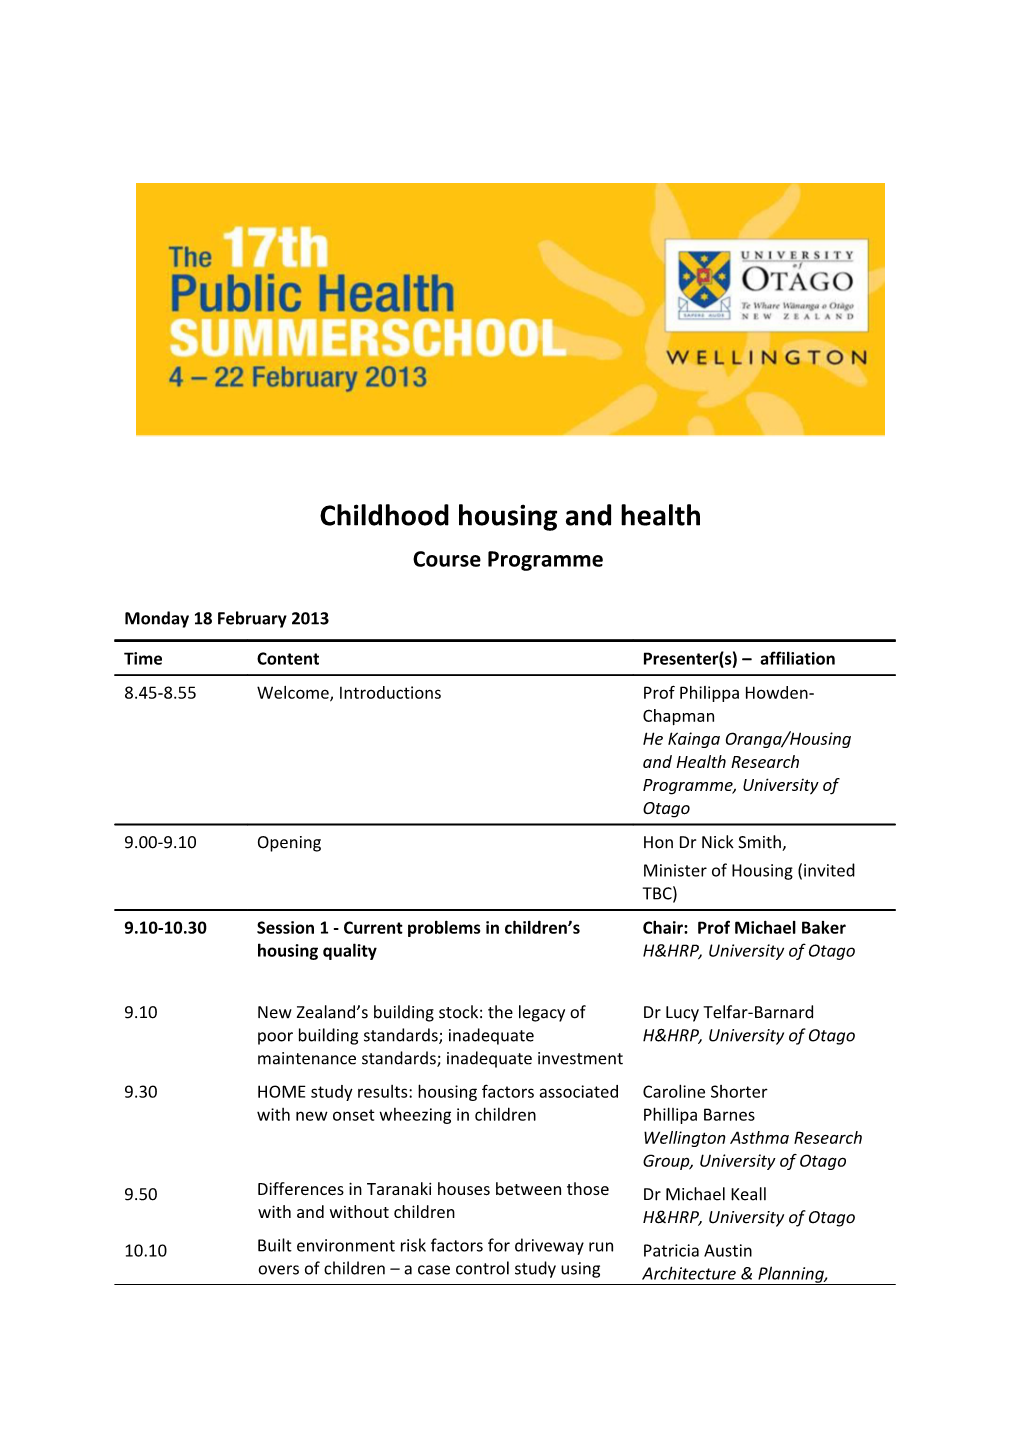 Childhood Housing and Health Course Programme 2 of 3